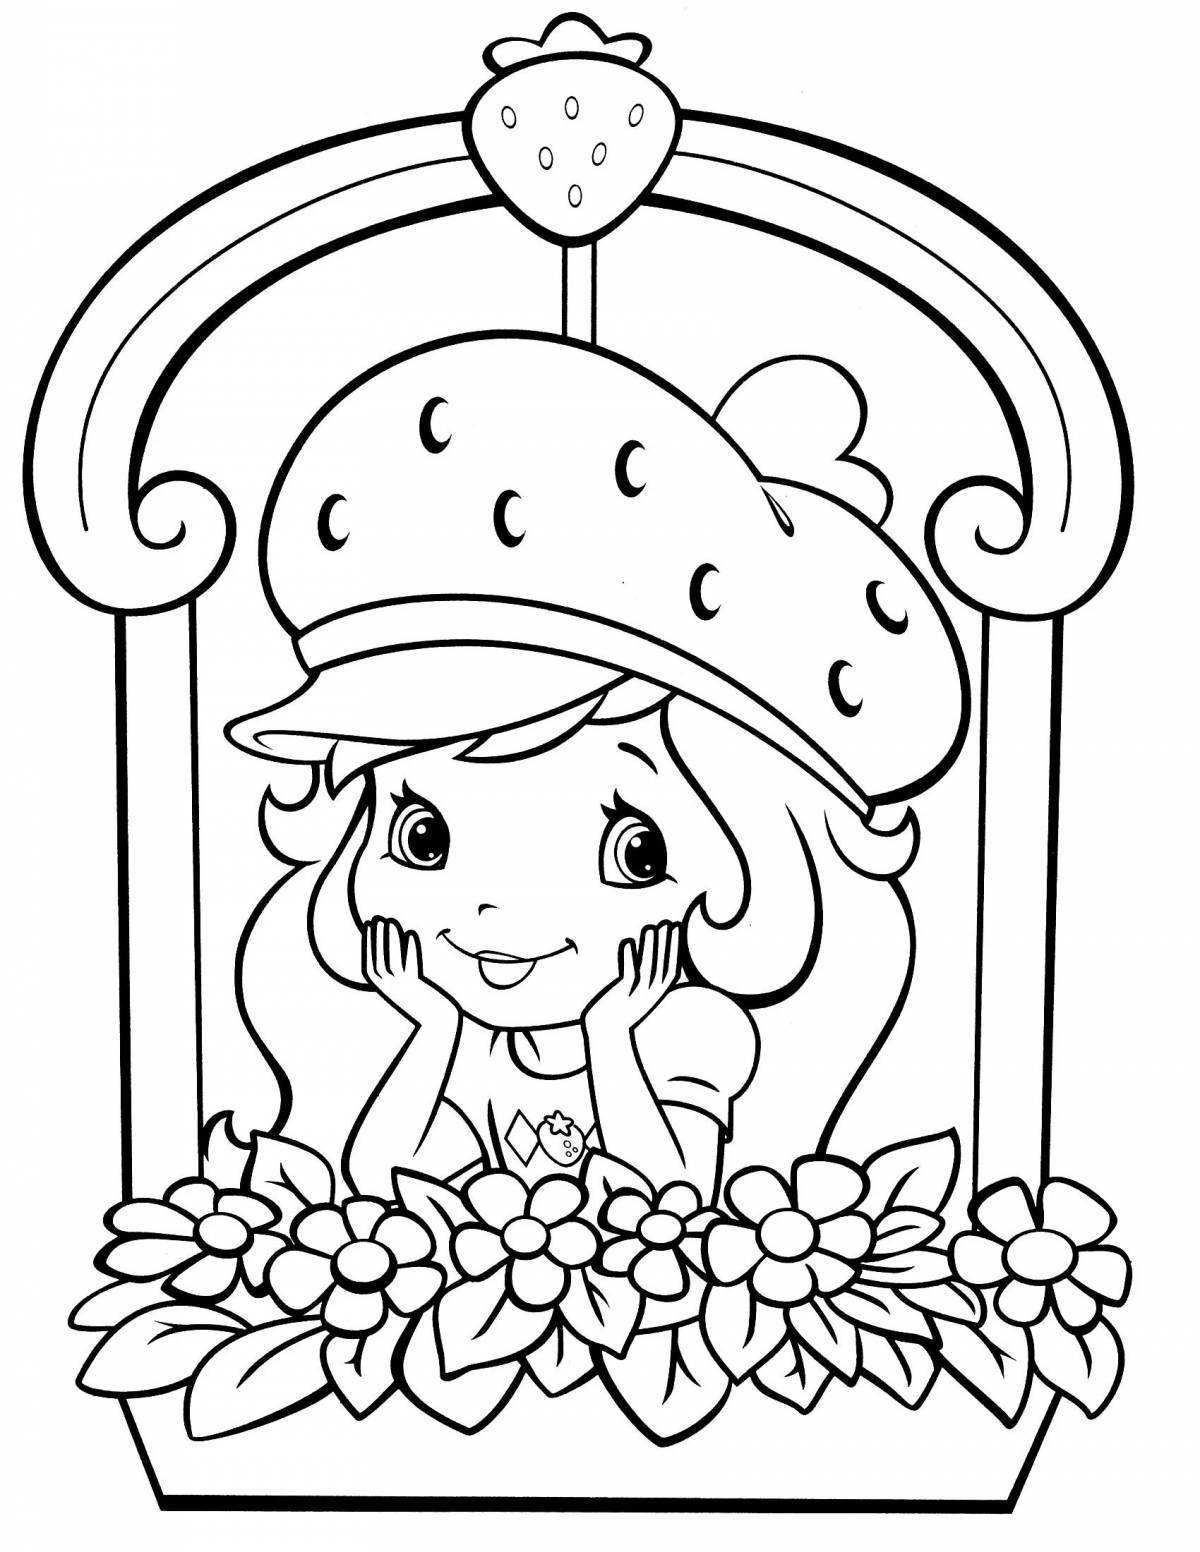 Fairytale coloring for girls 6 years old